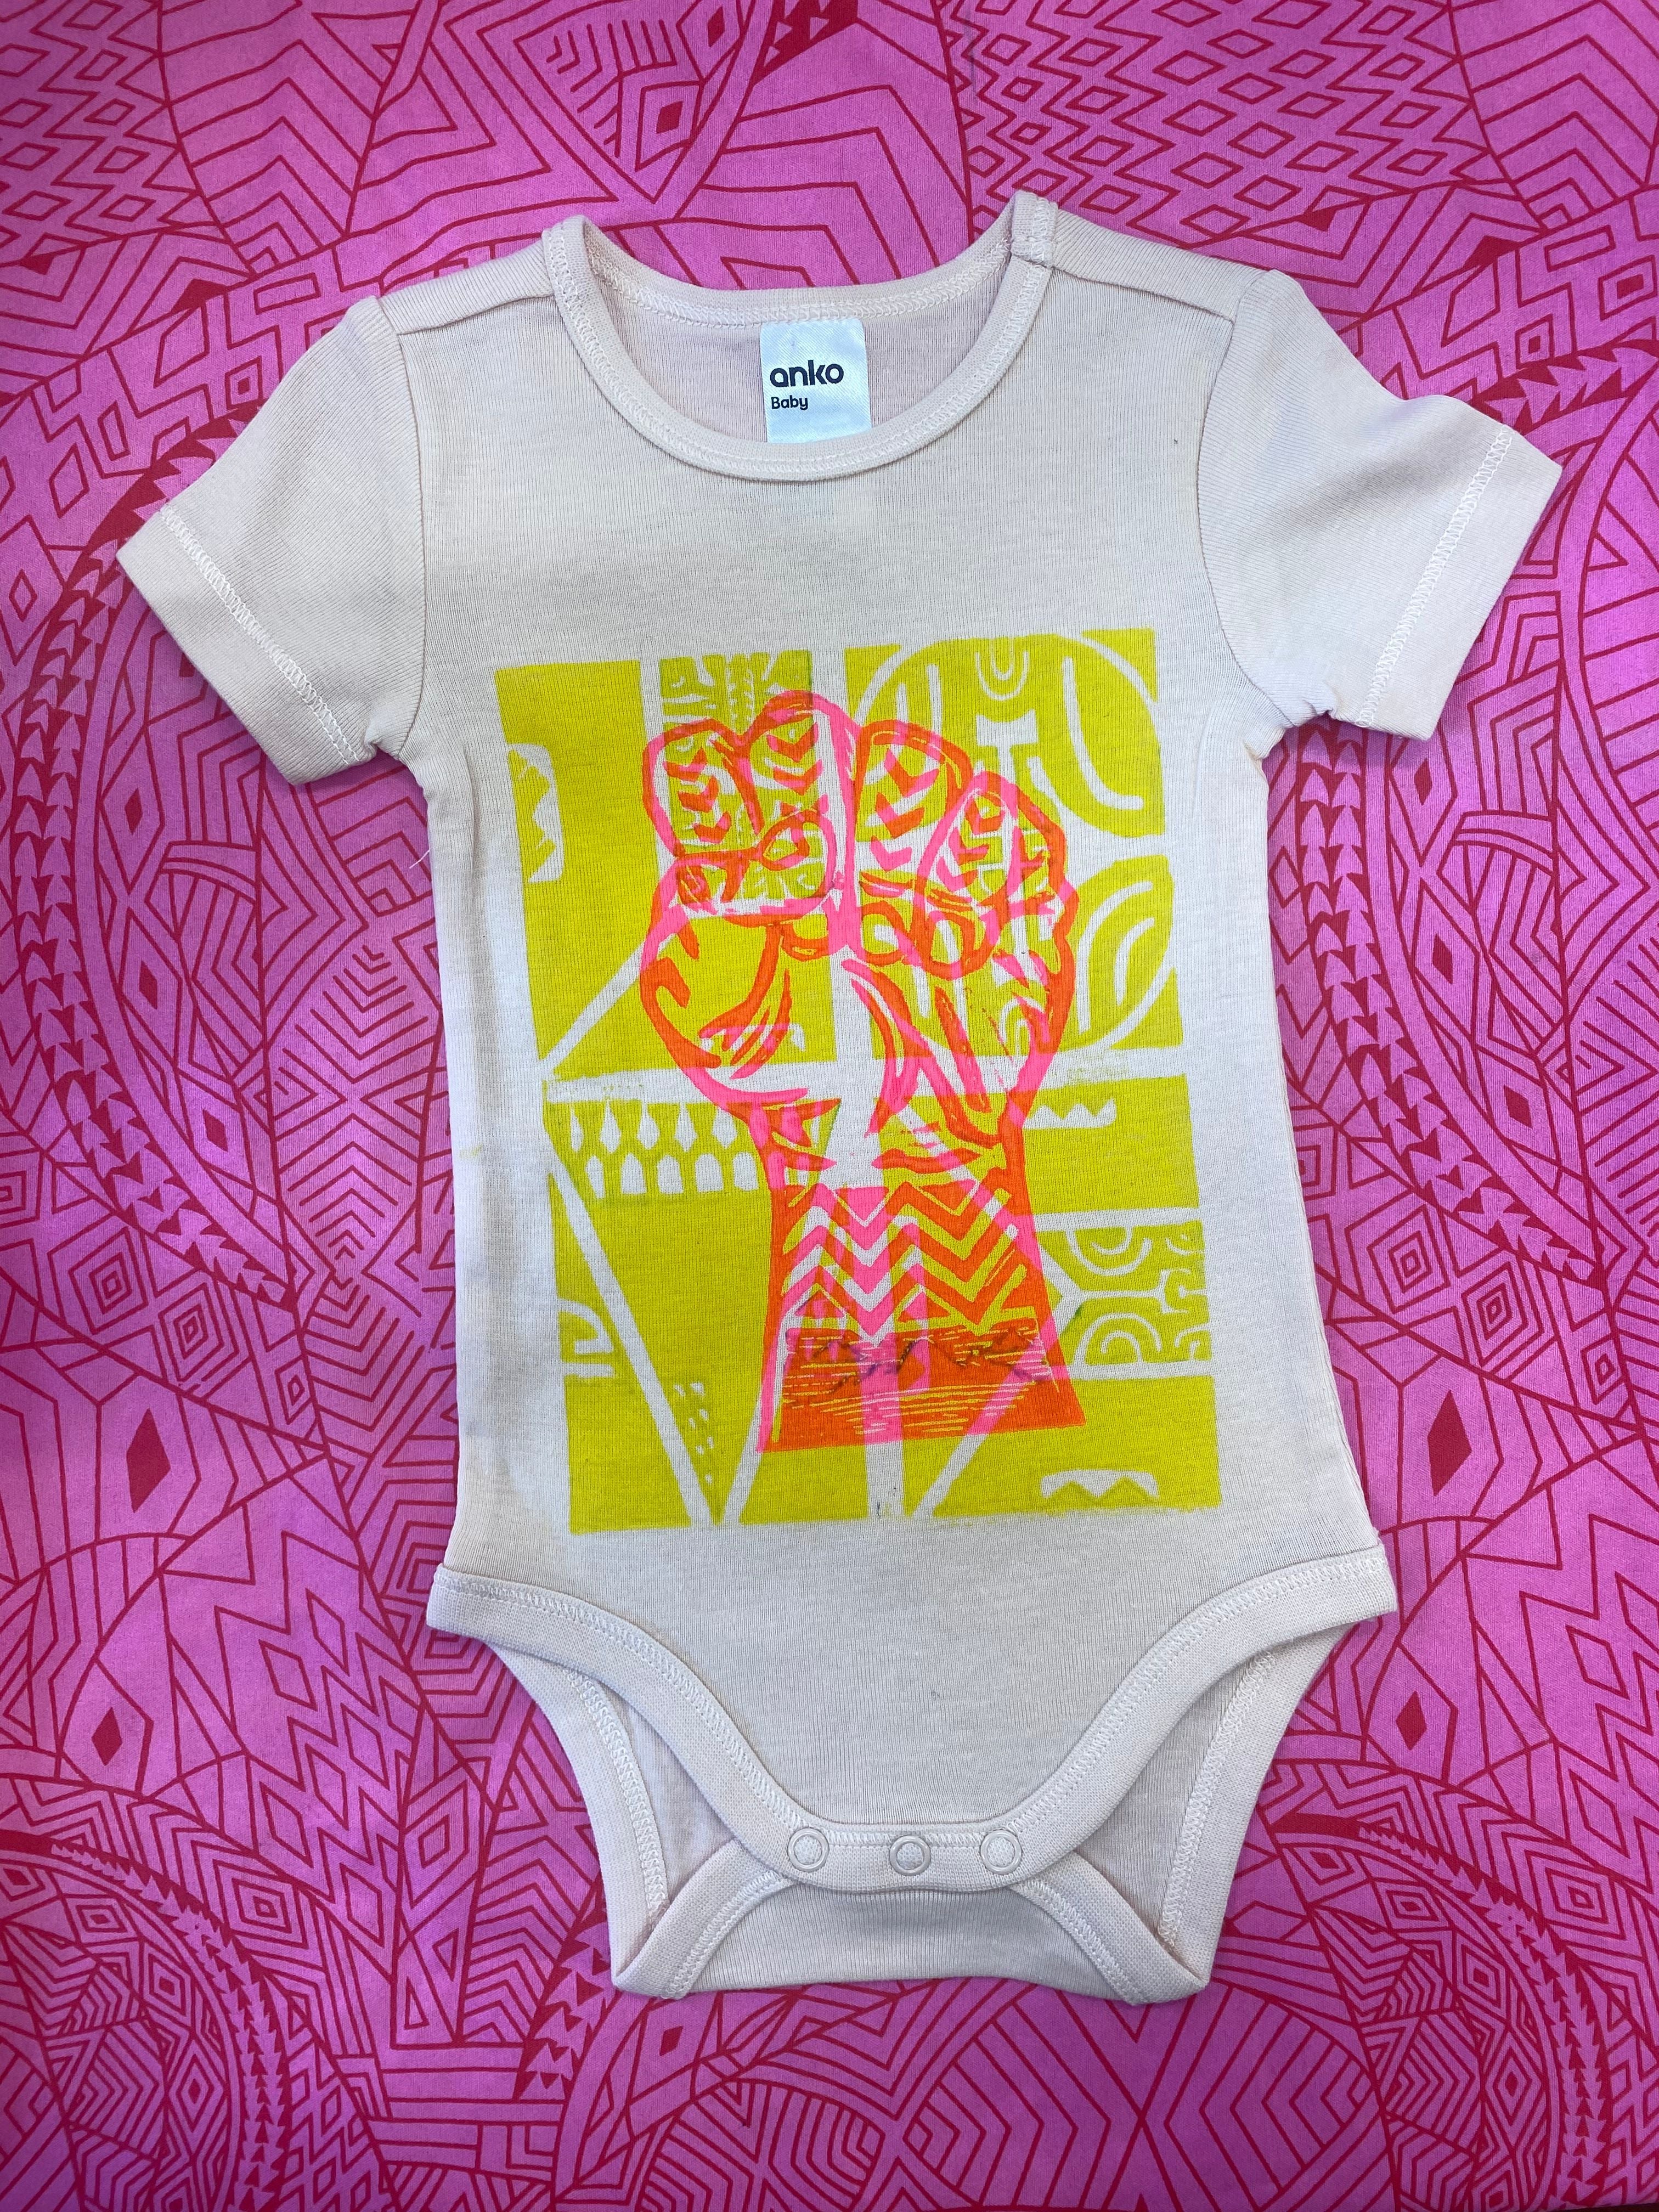 Hand-printed short sleeved onesies for Pepe - Size 0 (6-12 months) by Numa Mackenzie